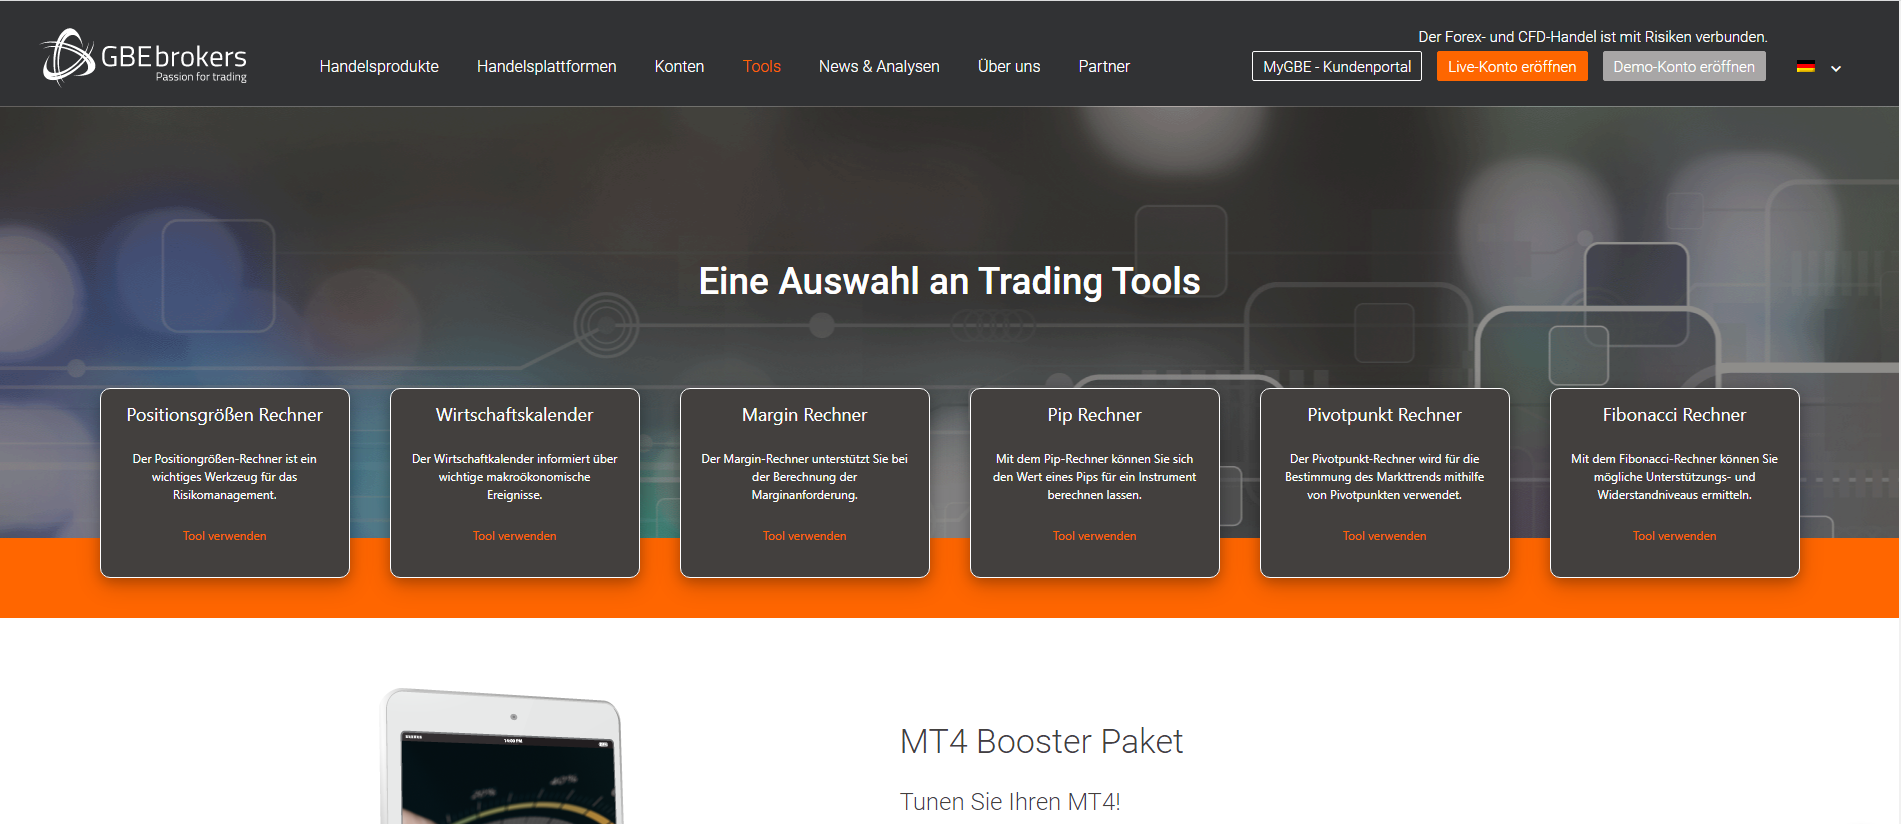 GBE Brokers Trading Tools